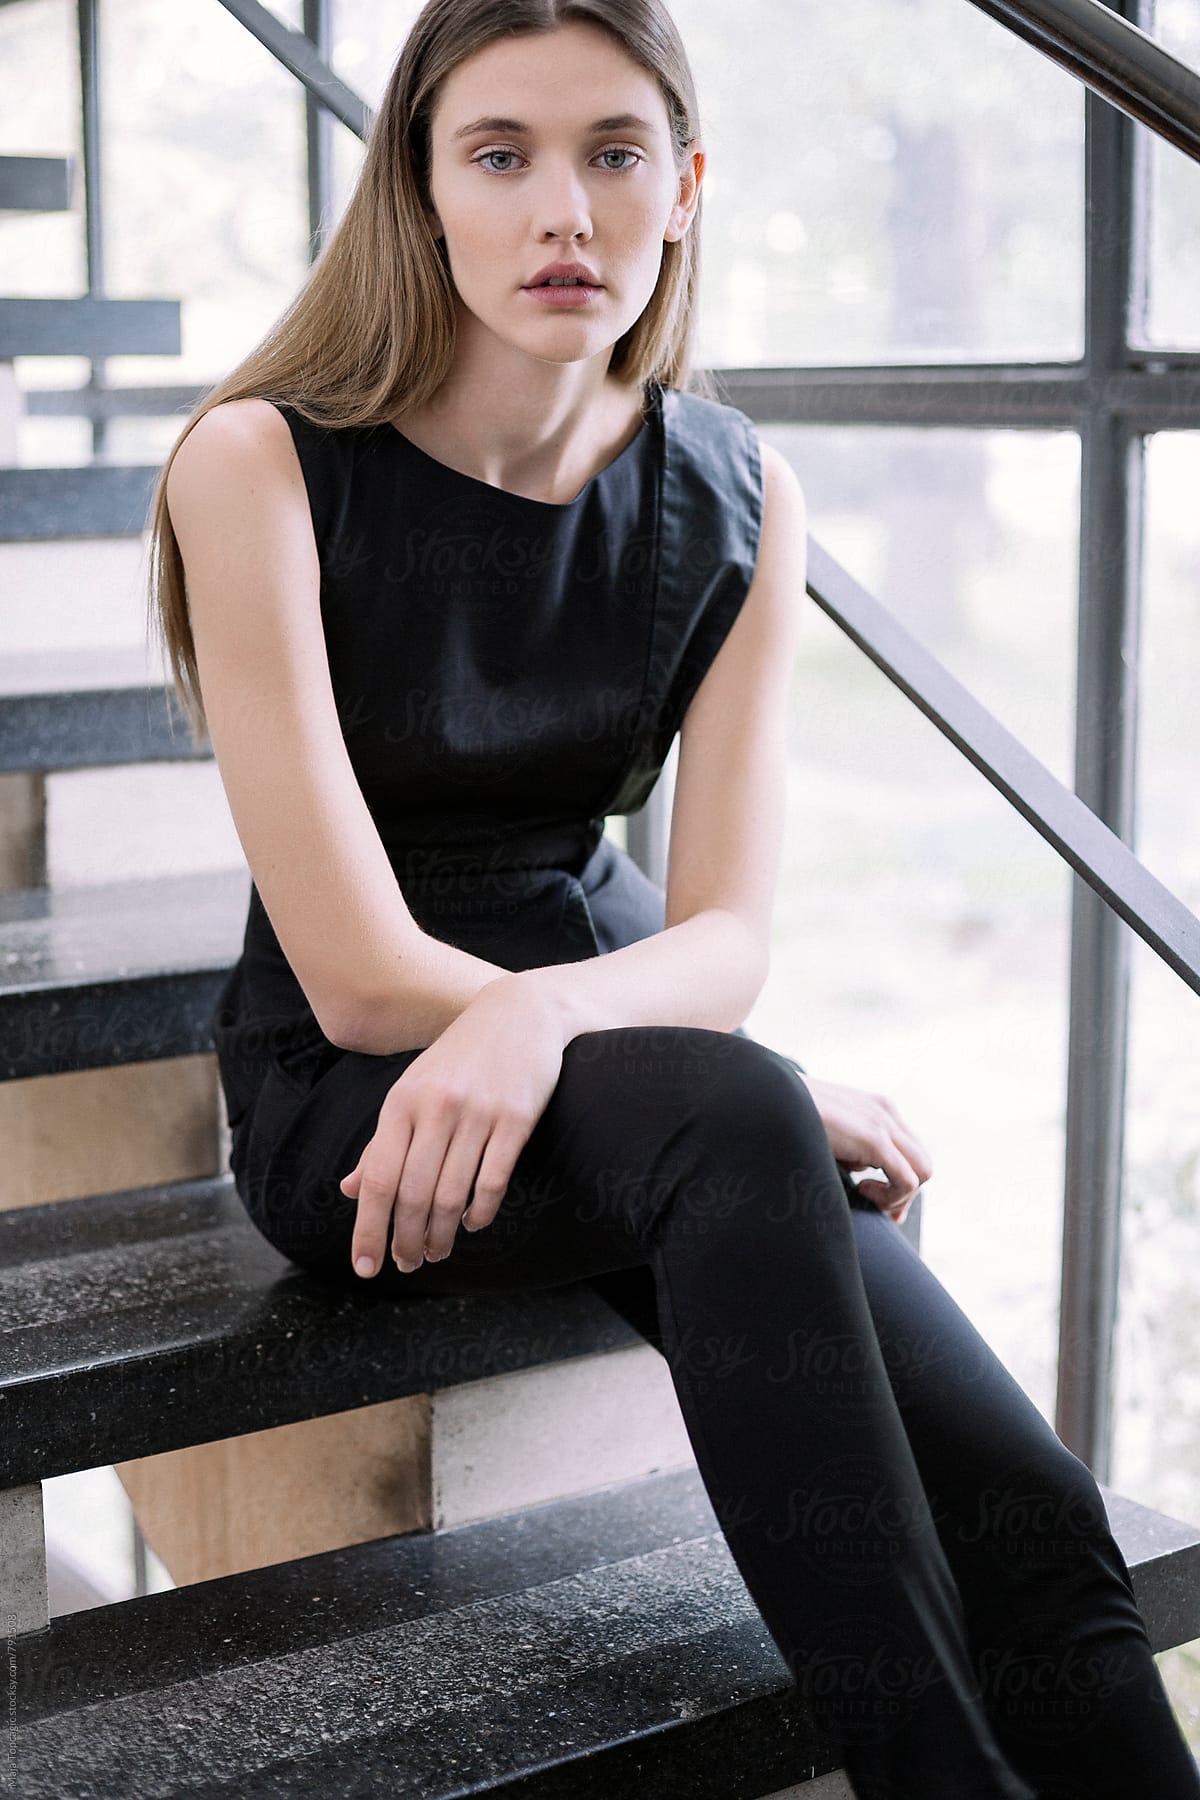 Beautiful Woman In A Black Suit Sitting On The Stairs By Stocksy Contributor Maja Topcagic